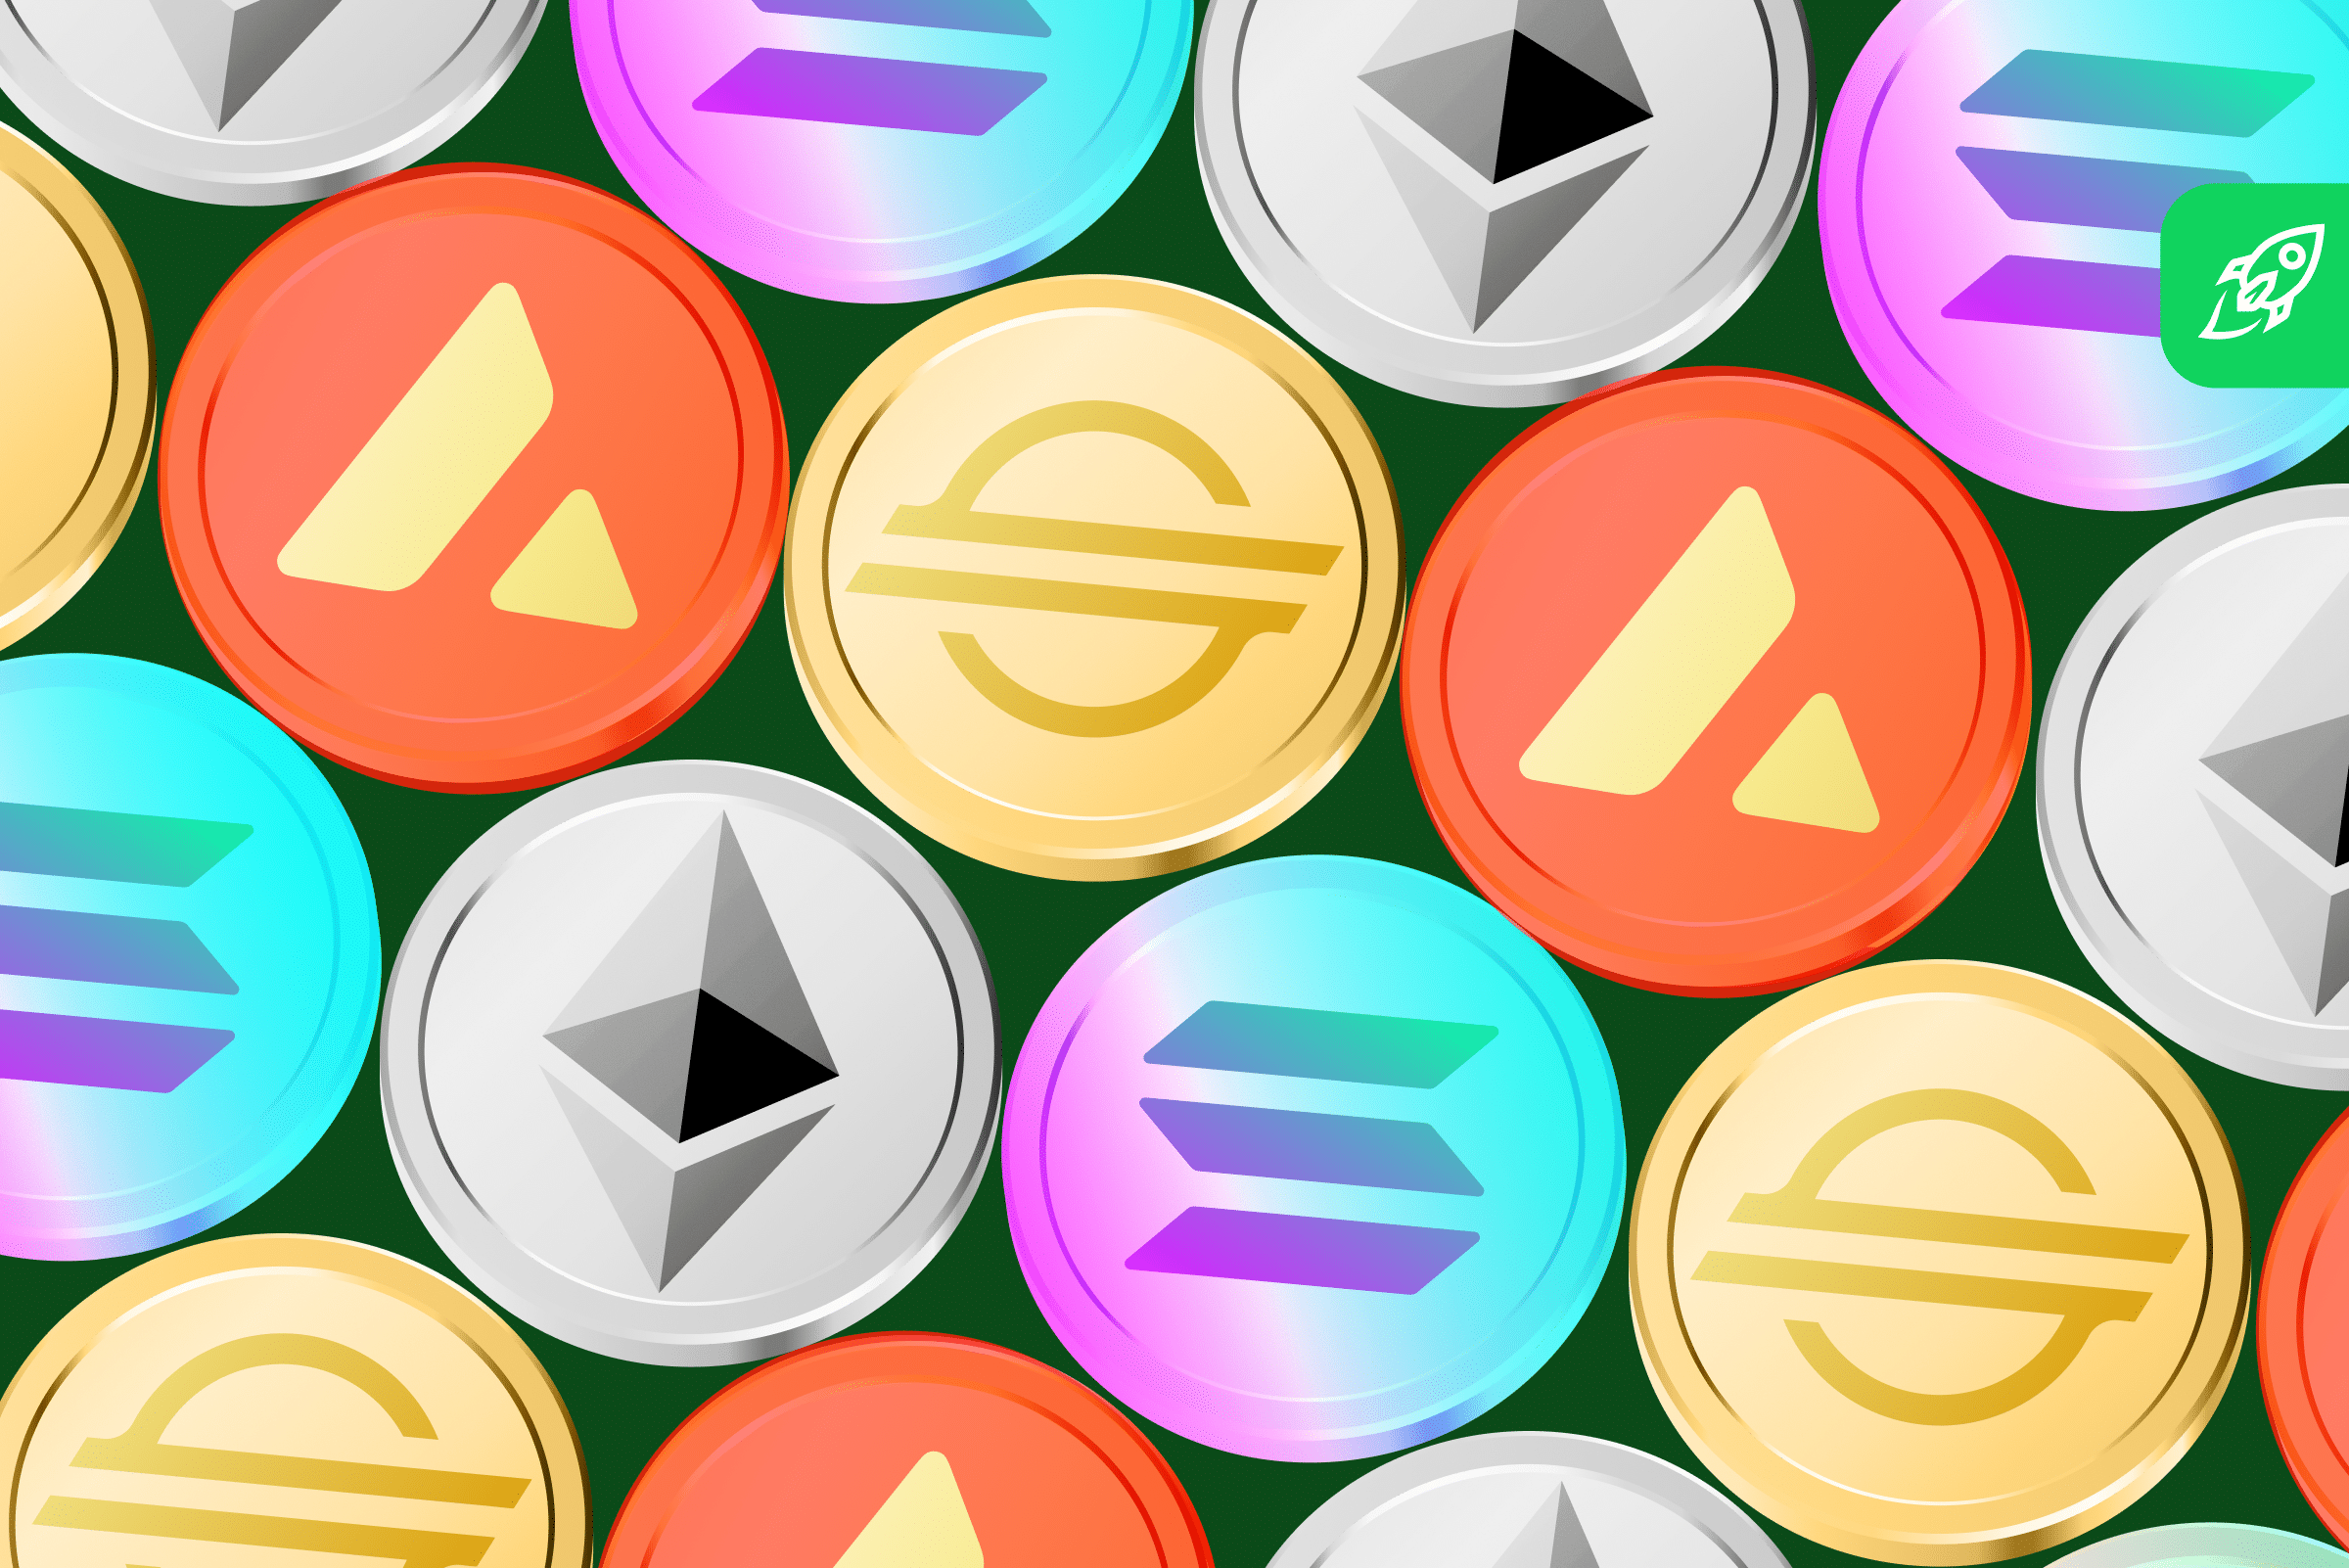 5 Best Altcoins To Buy Now in for Maximum Growth - Coinpedia Fintech News